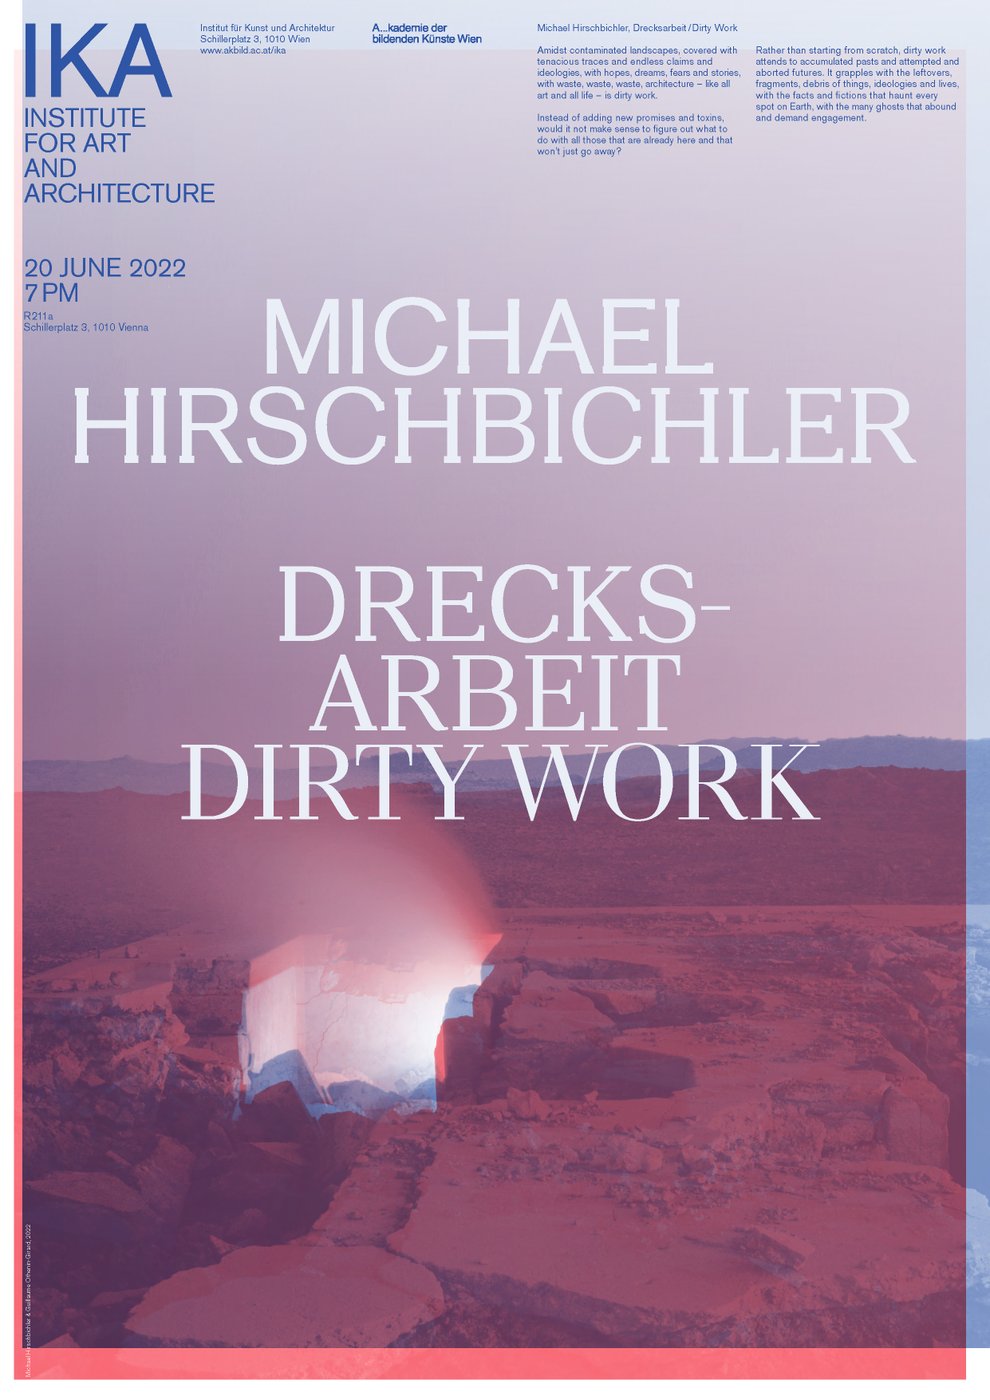 Poster to announce the lecture by Michael Hirschbichler in blue and red tones. The title of the lecture in white letters: Drecksarbeit/Dirty Work and behind a photograph of a desert-like, rocky landscape, open view to the horizon. In the middle of the image the ground breaks open and light shines through.